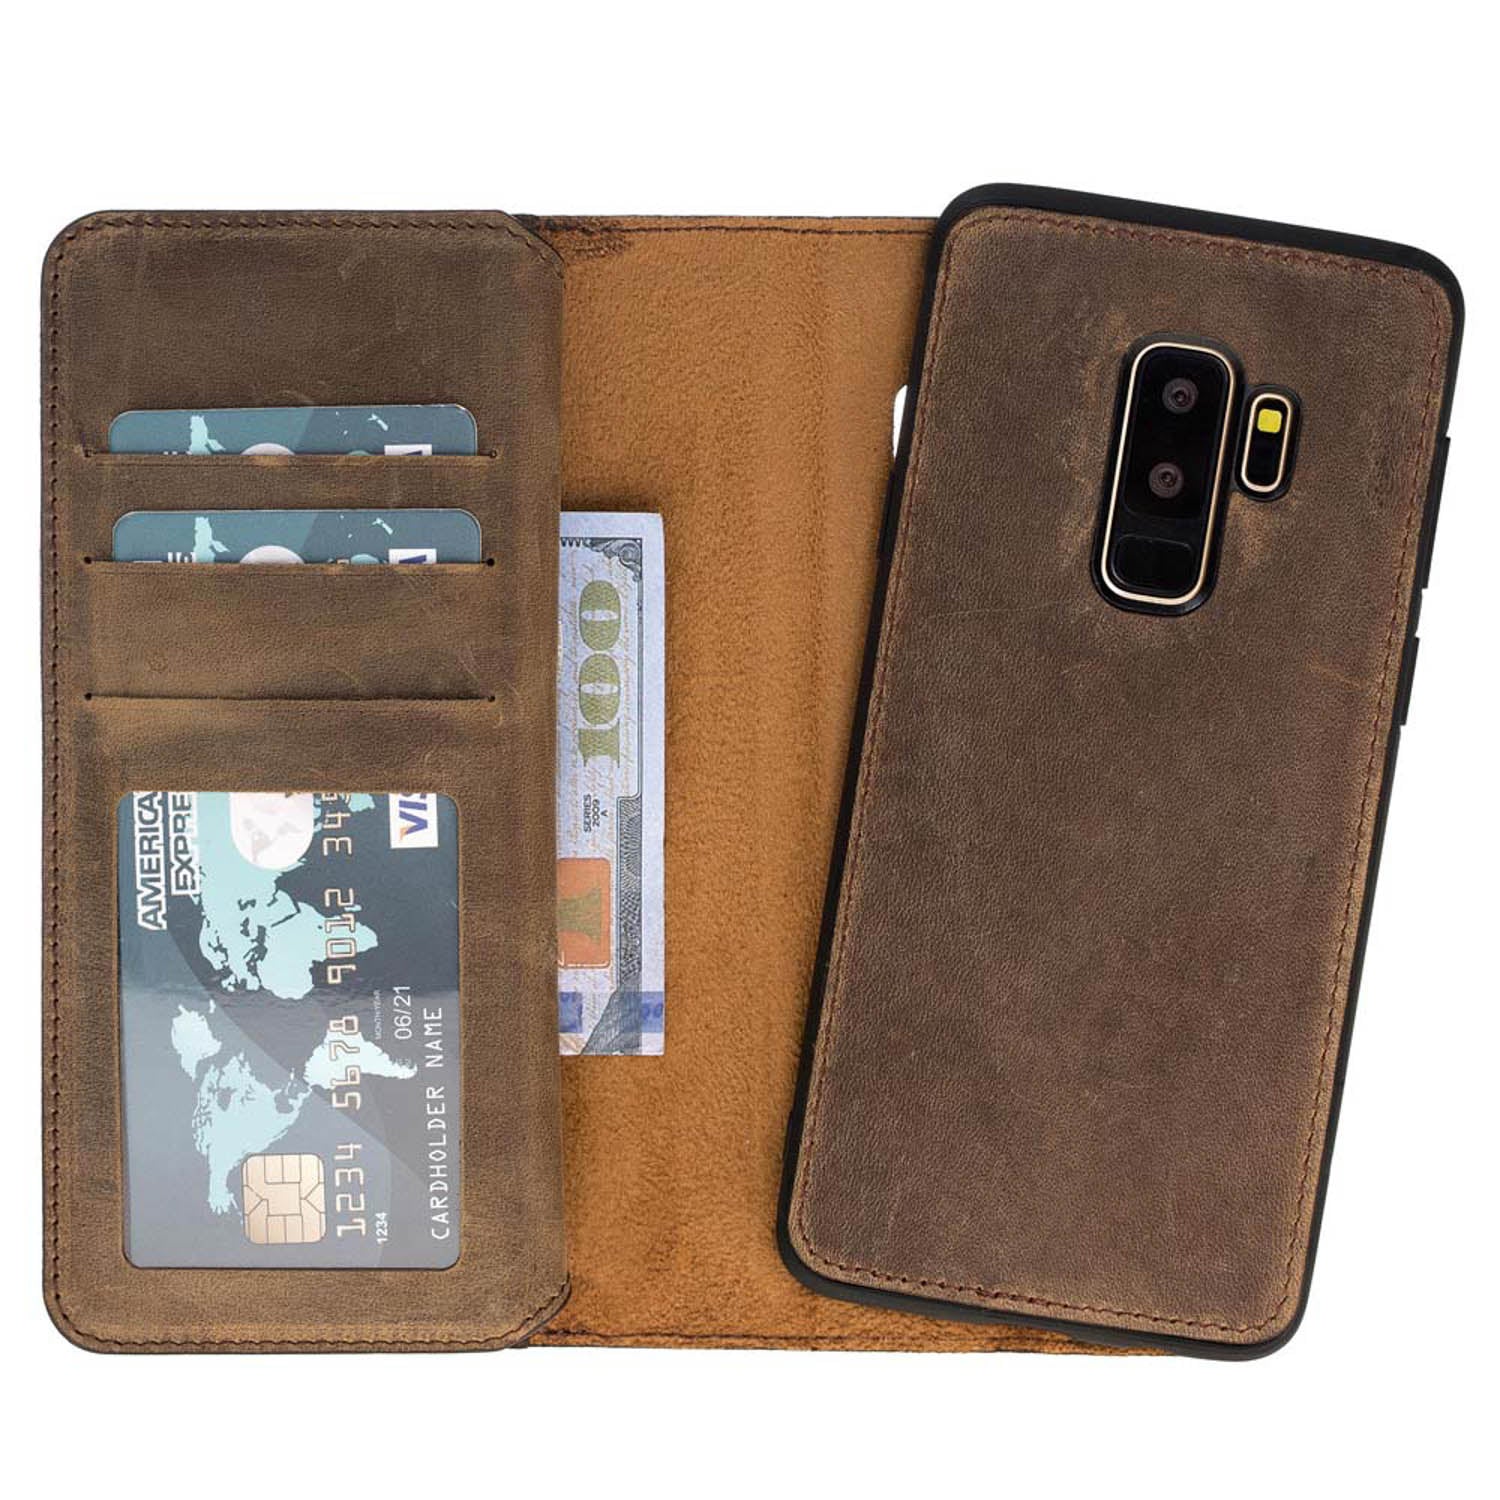 Smartphone Flip Cases Wallet Case for Samsung Galaxy S9 Plus, Leather Case  with Card Holder, Double Magnetic Clasp and Durable Shockproof Cover for  Samsung Galaxy S9 Plus,Magnetic Phone Case for Car F 